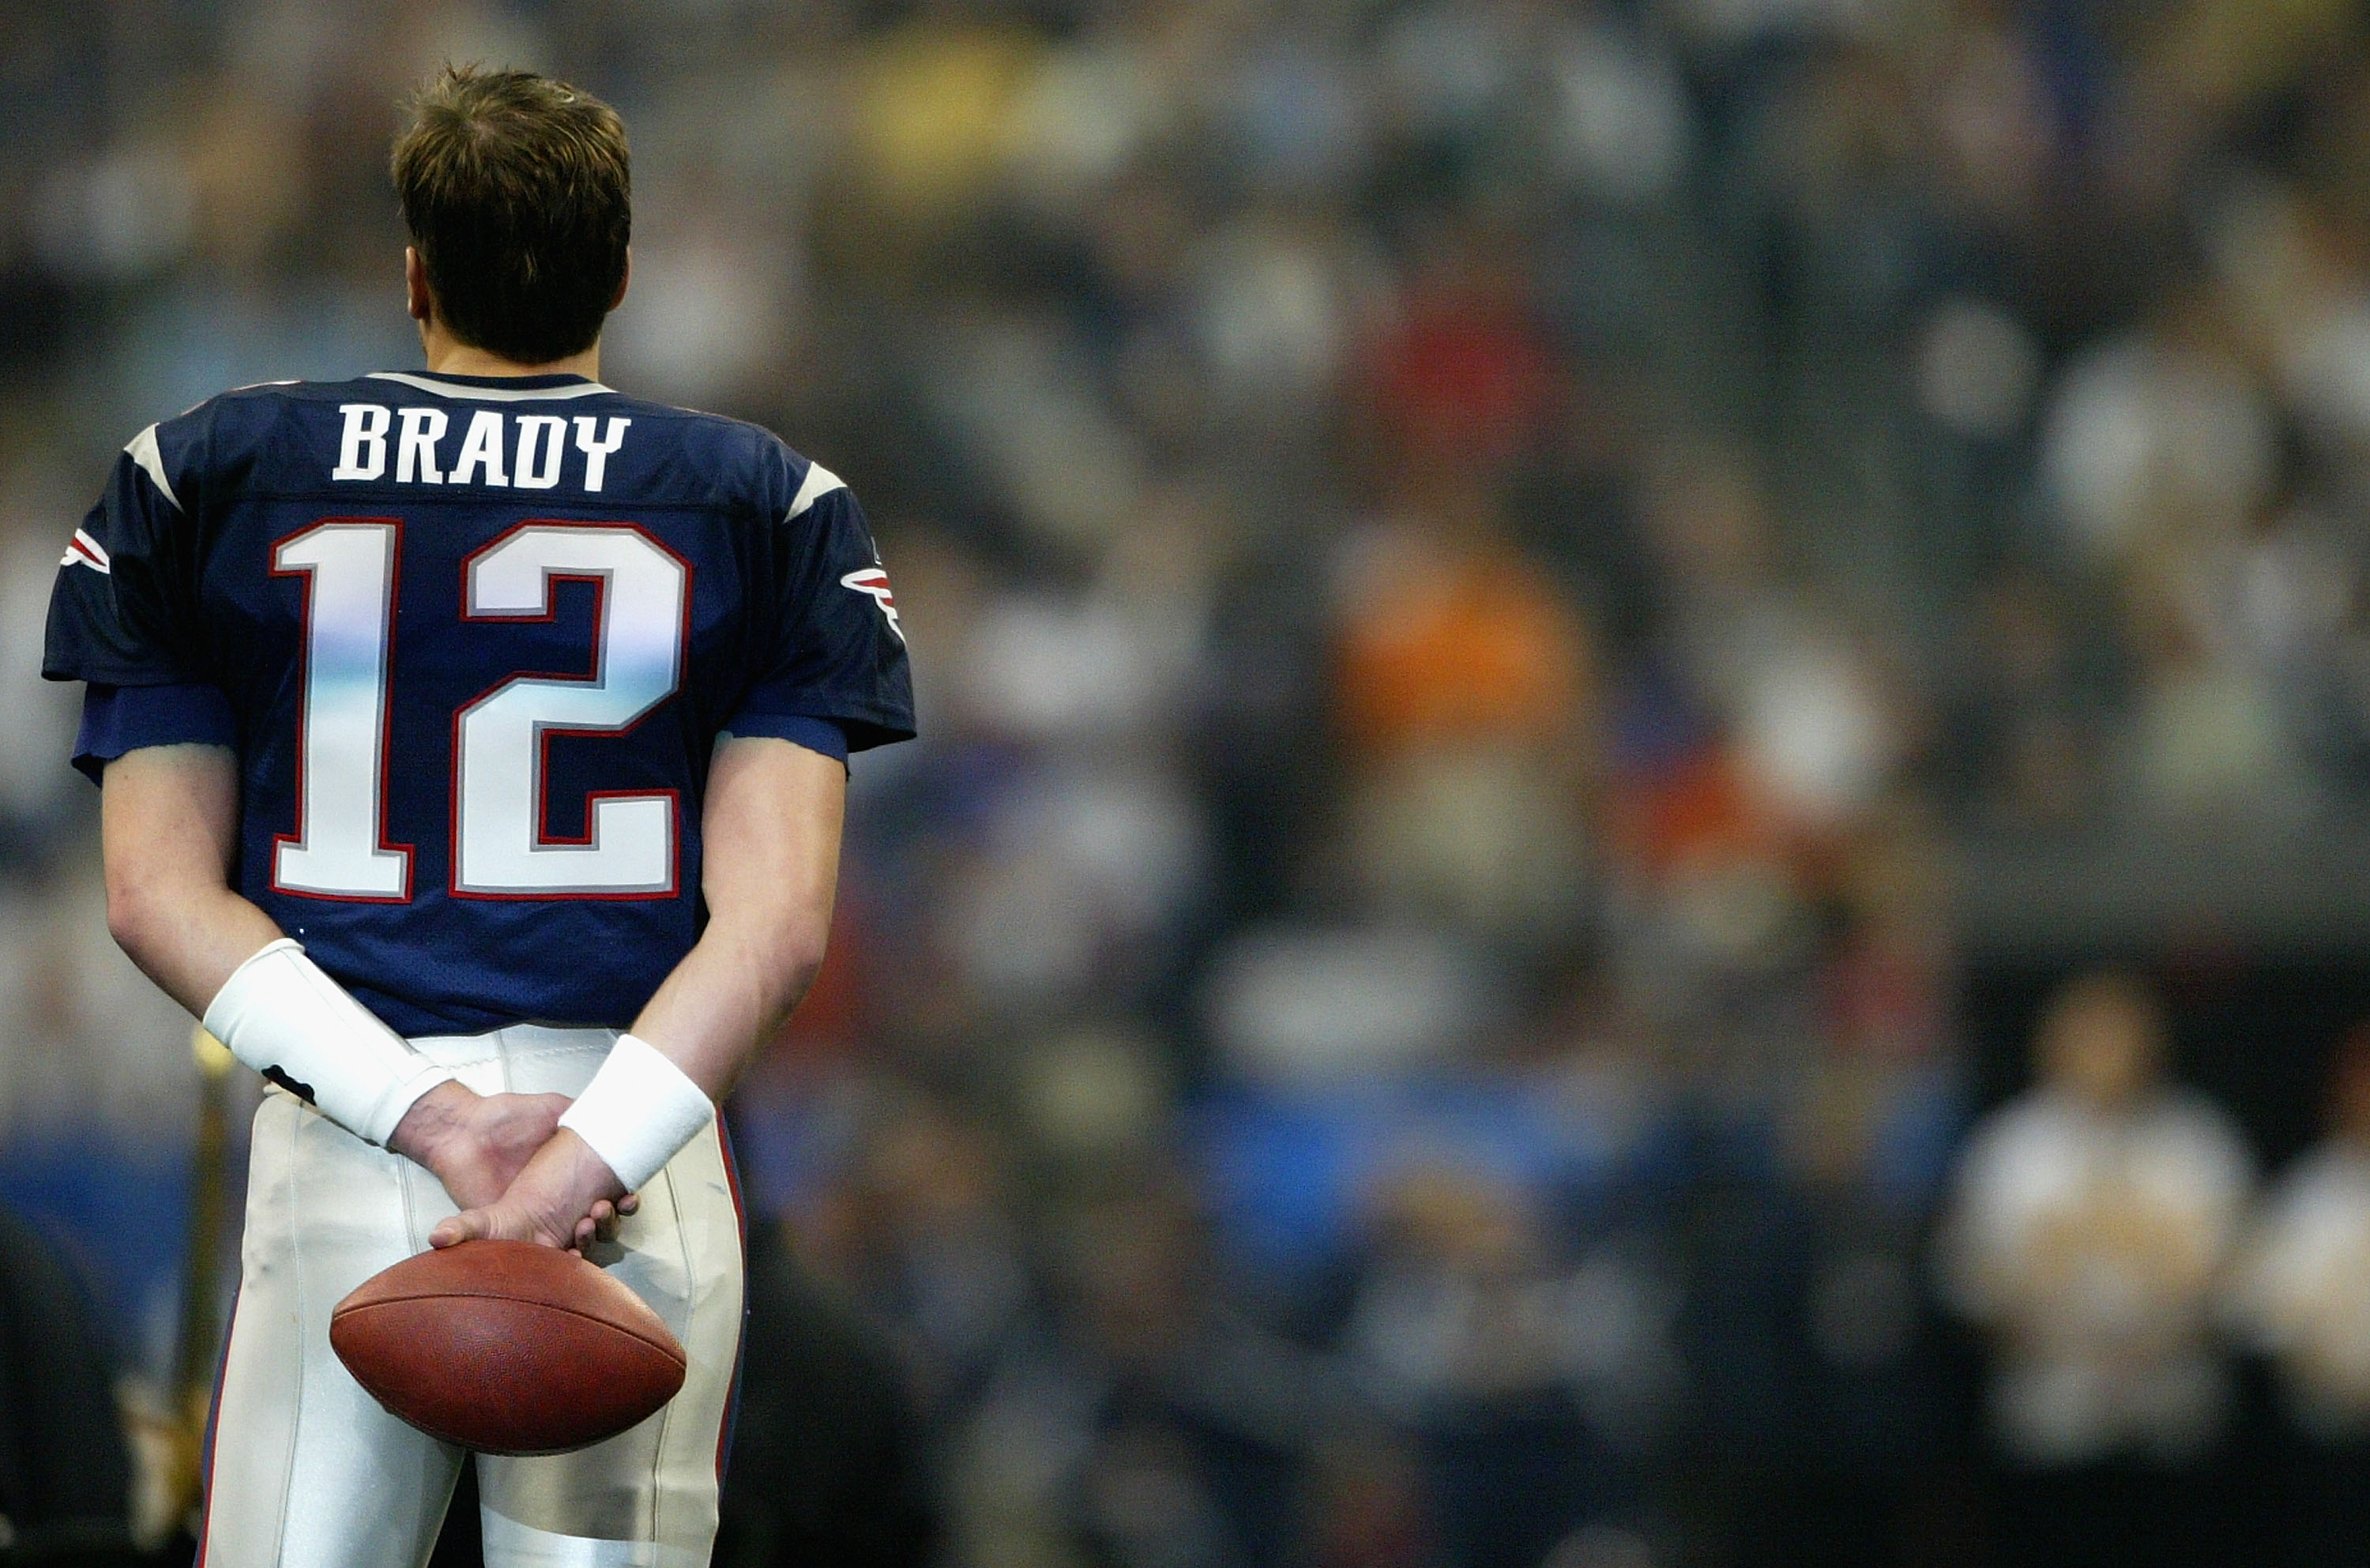 Tom Brady previews Super Bowl XXXVIII between the New England Patriots and the Carolina Panthers in 2004.